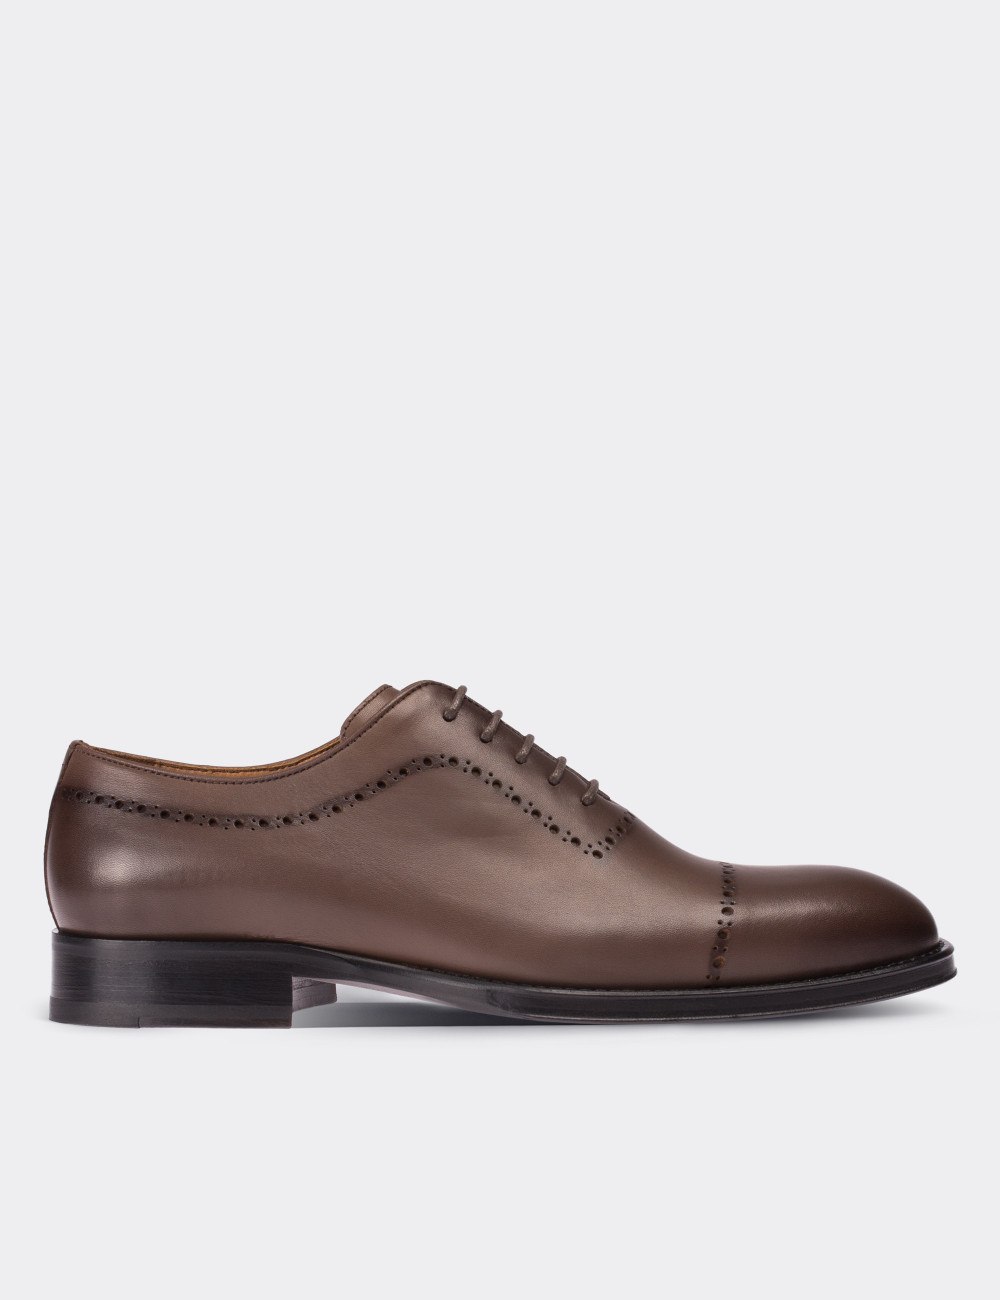 Sandstone  Leather Classic Shoes - 00491MVZNK01